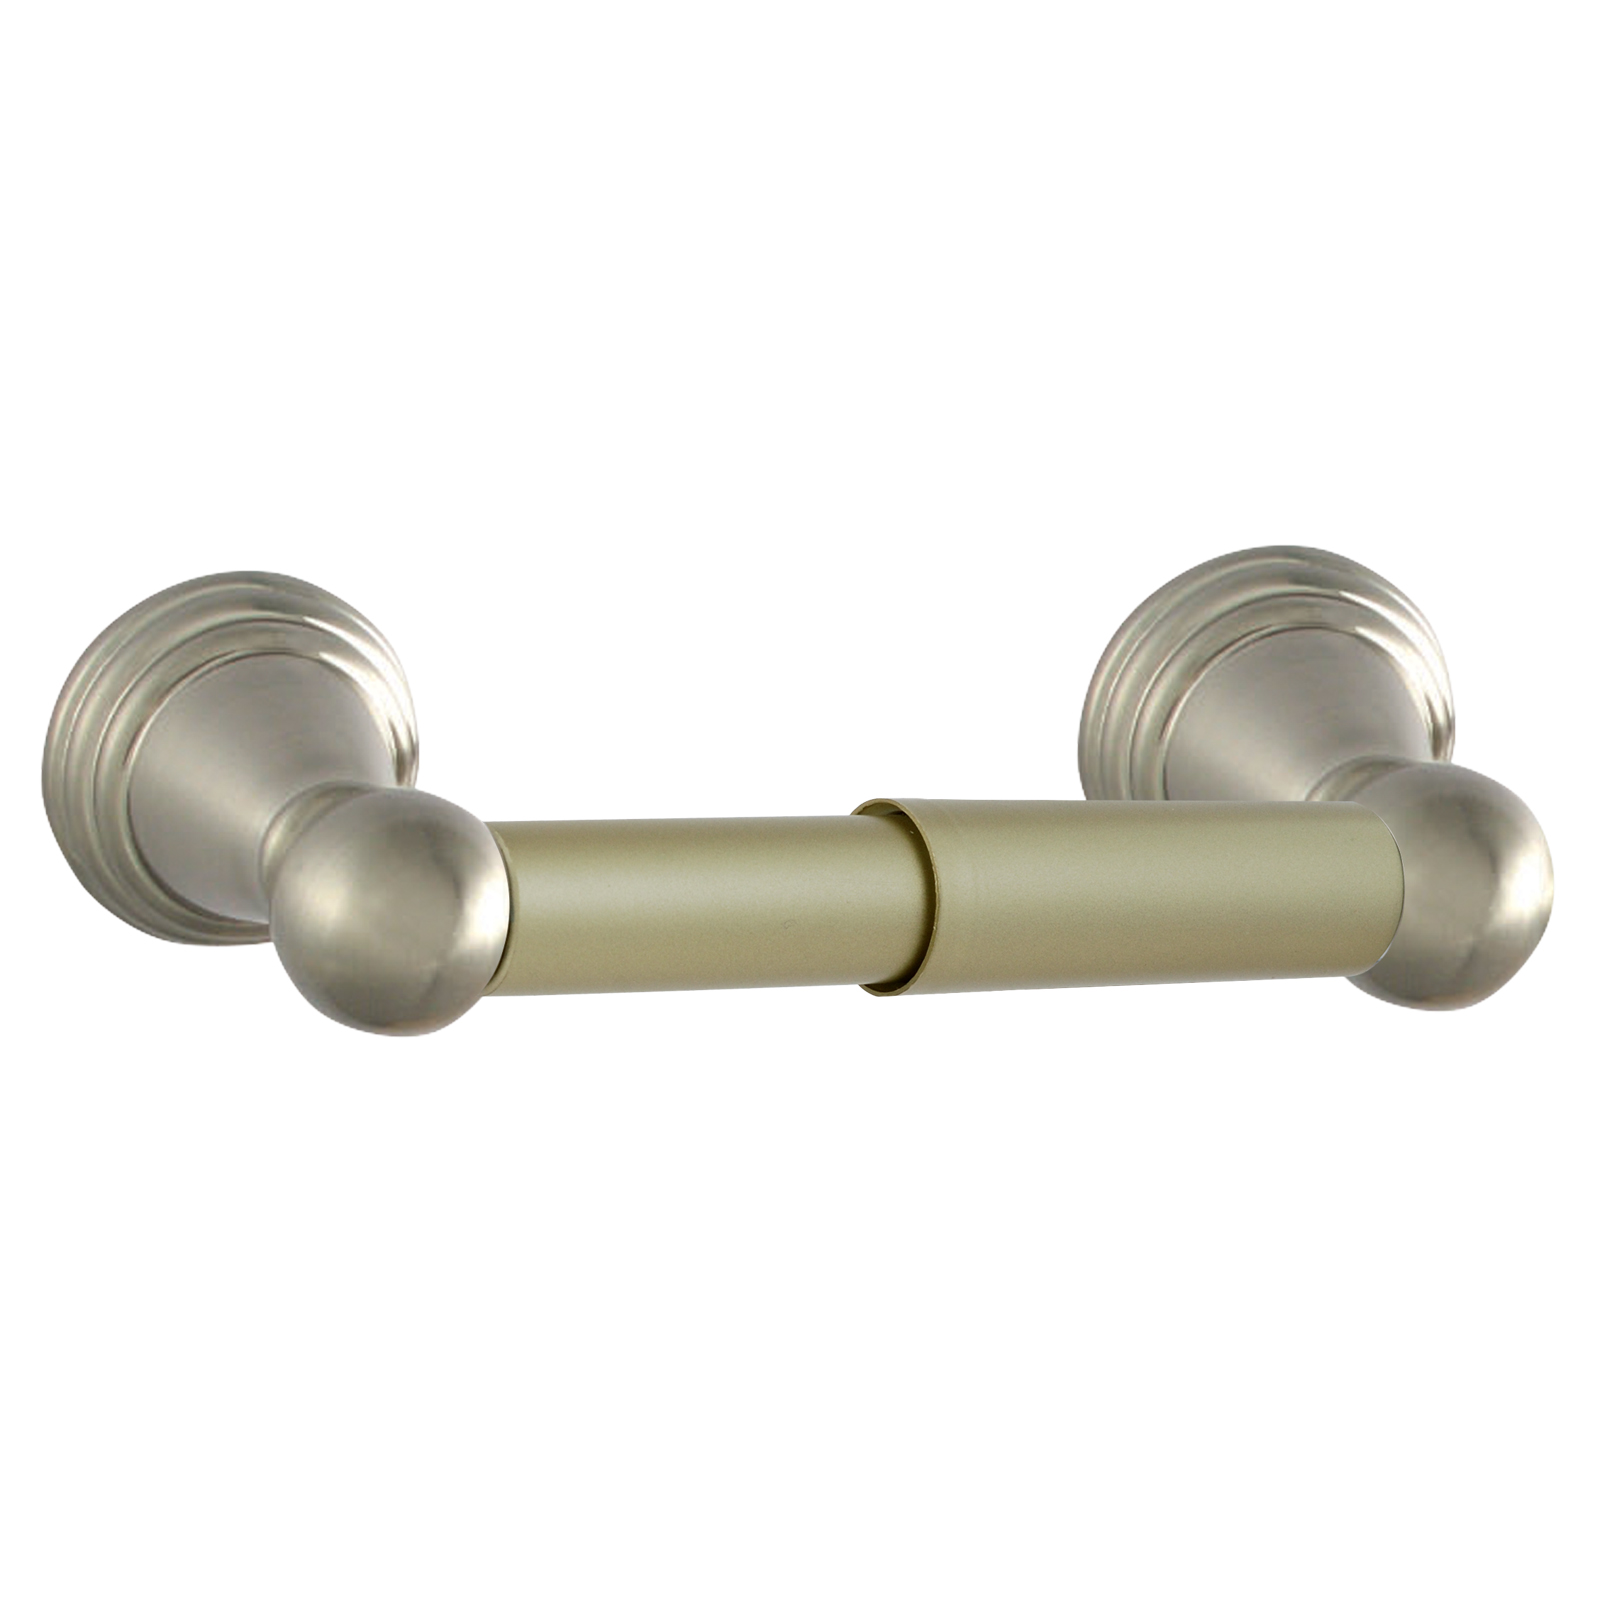 Exquisite Toilet Paper Holder Centennial Brushed Nickel Finish